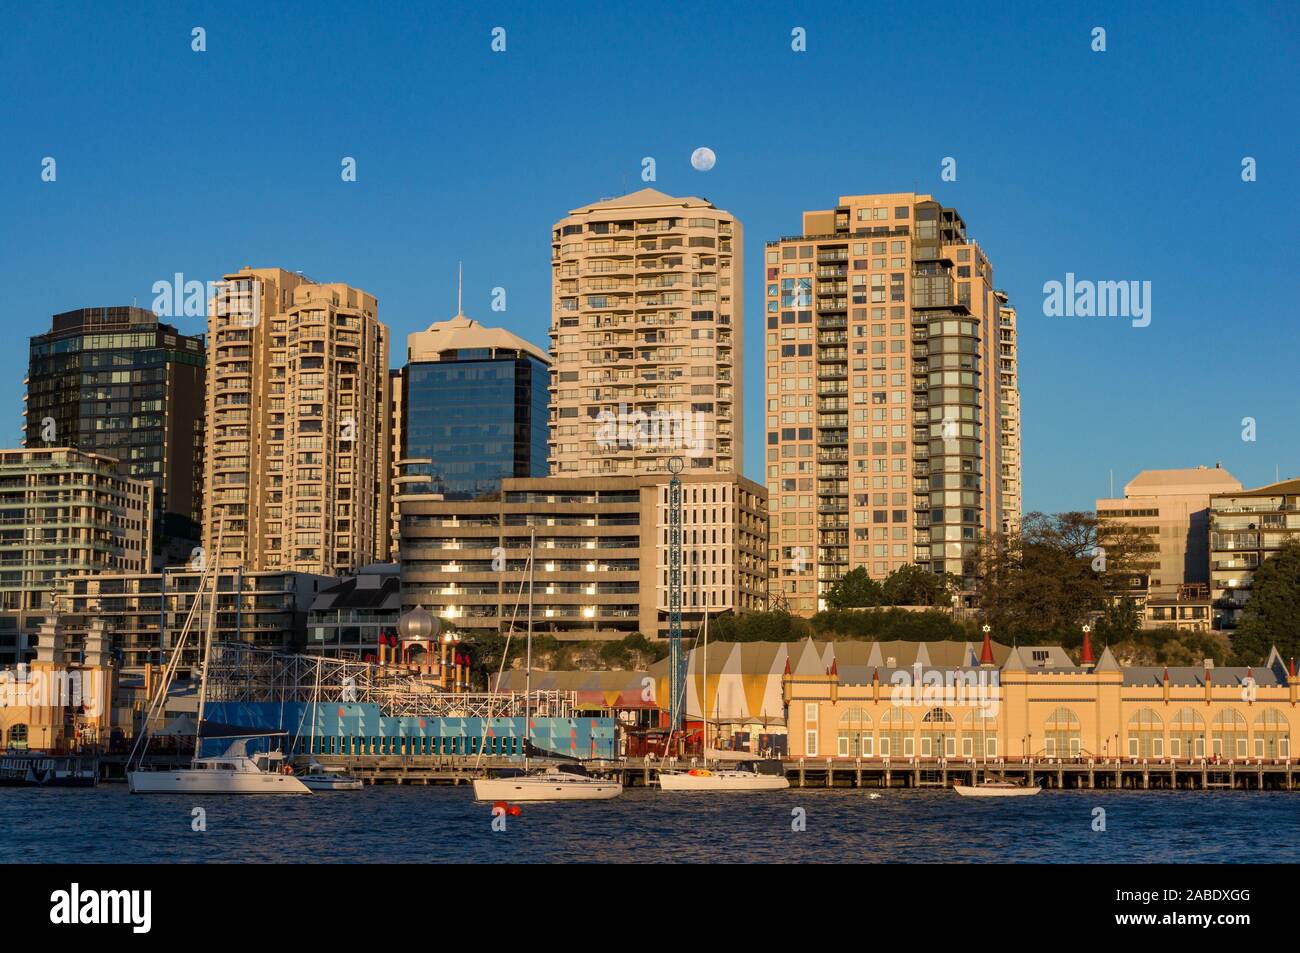 Milsons Point skyline wih full moon over buildings and Lavender bay with yachts . Sydney, Australia Stock Photo